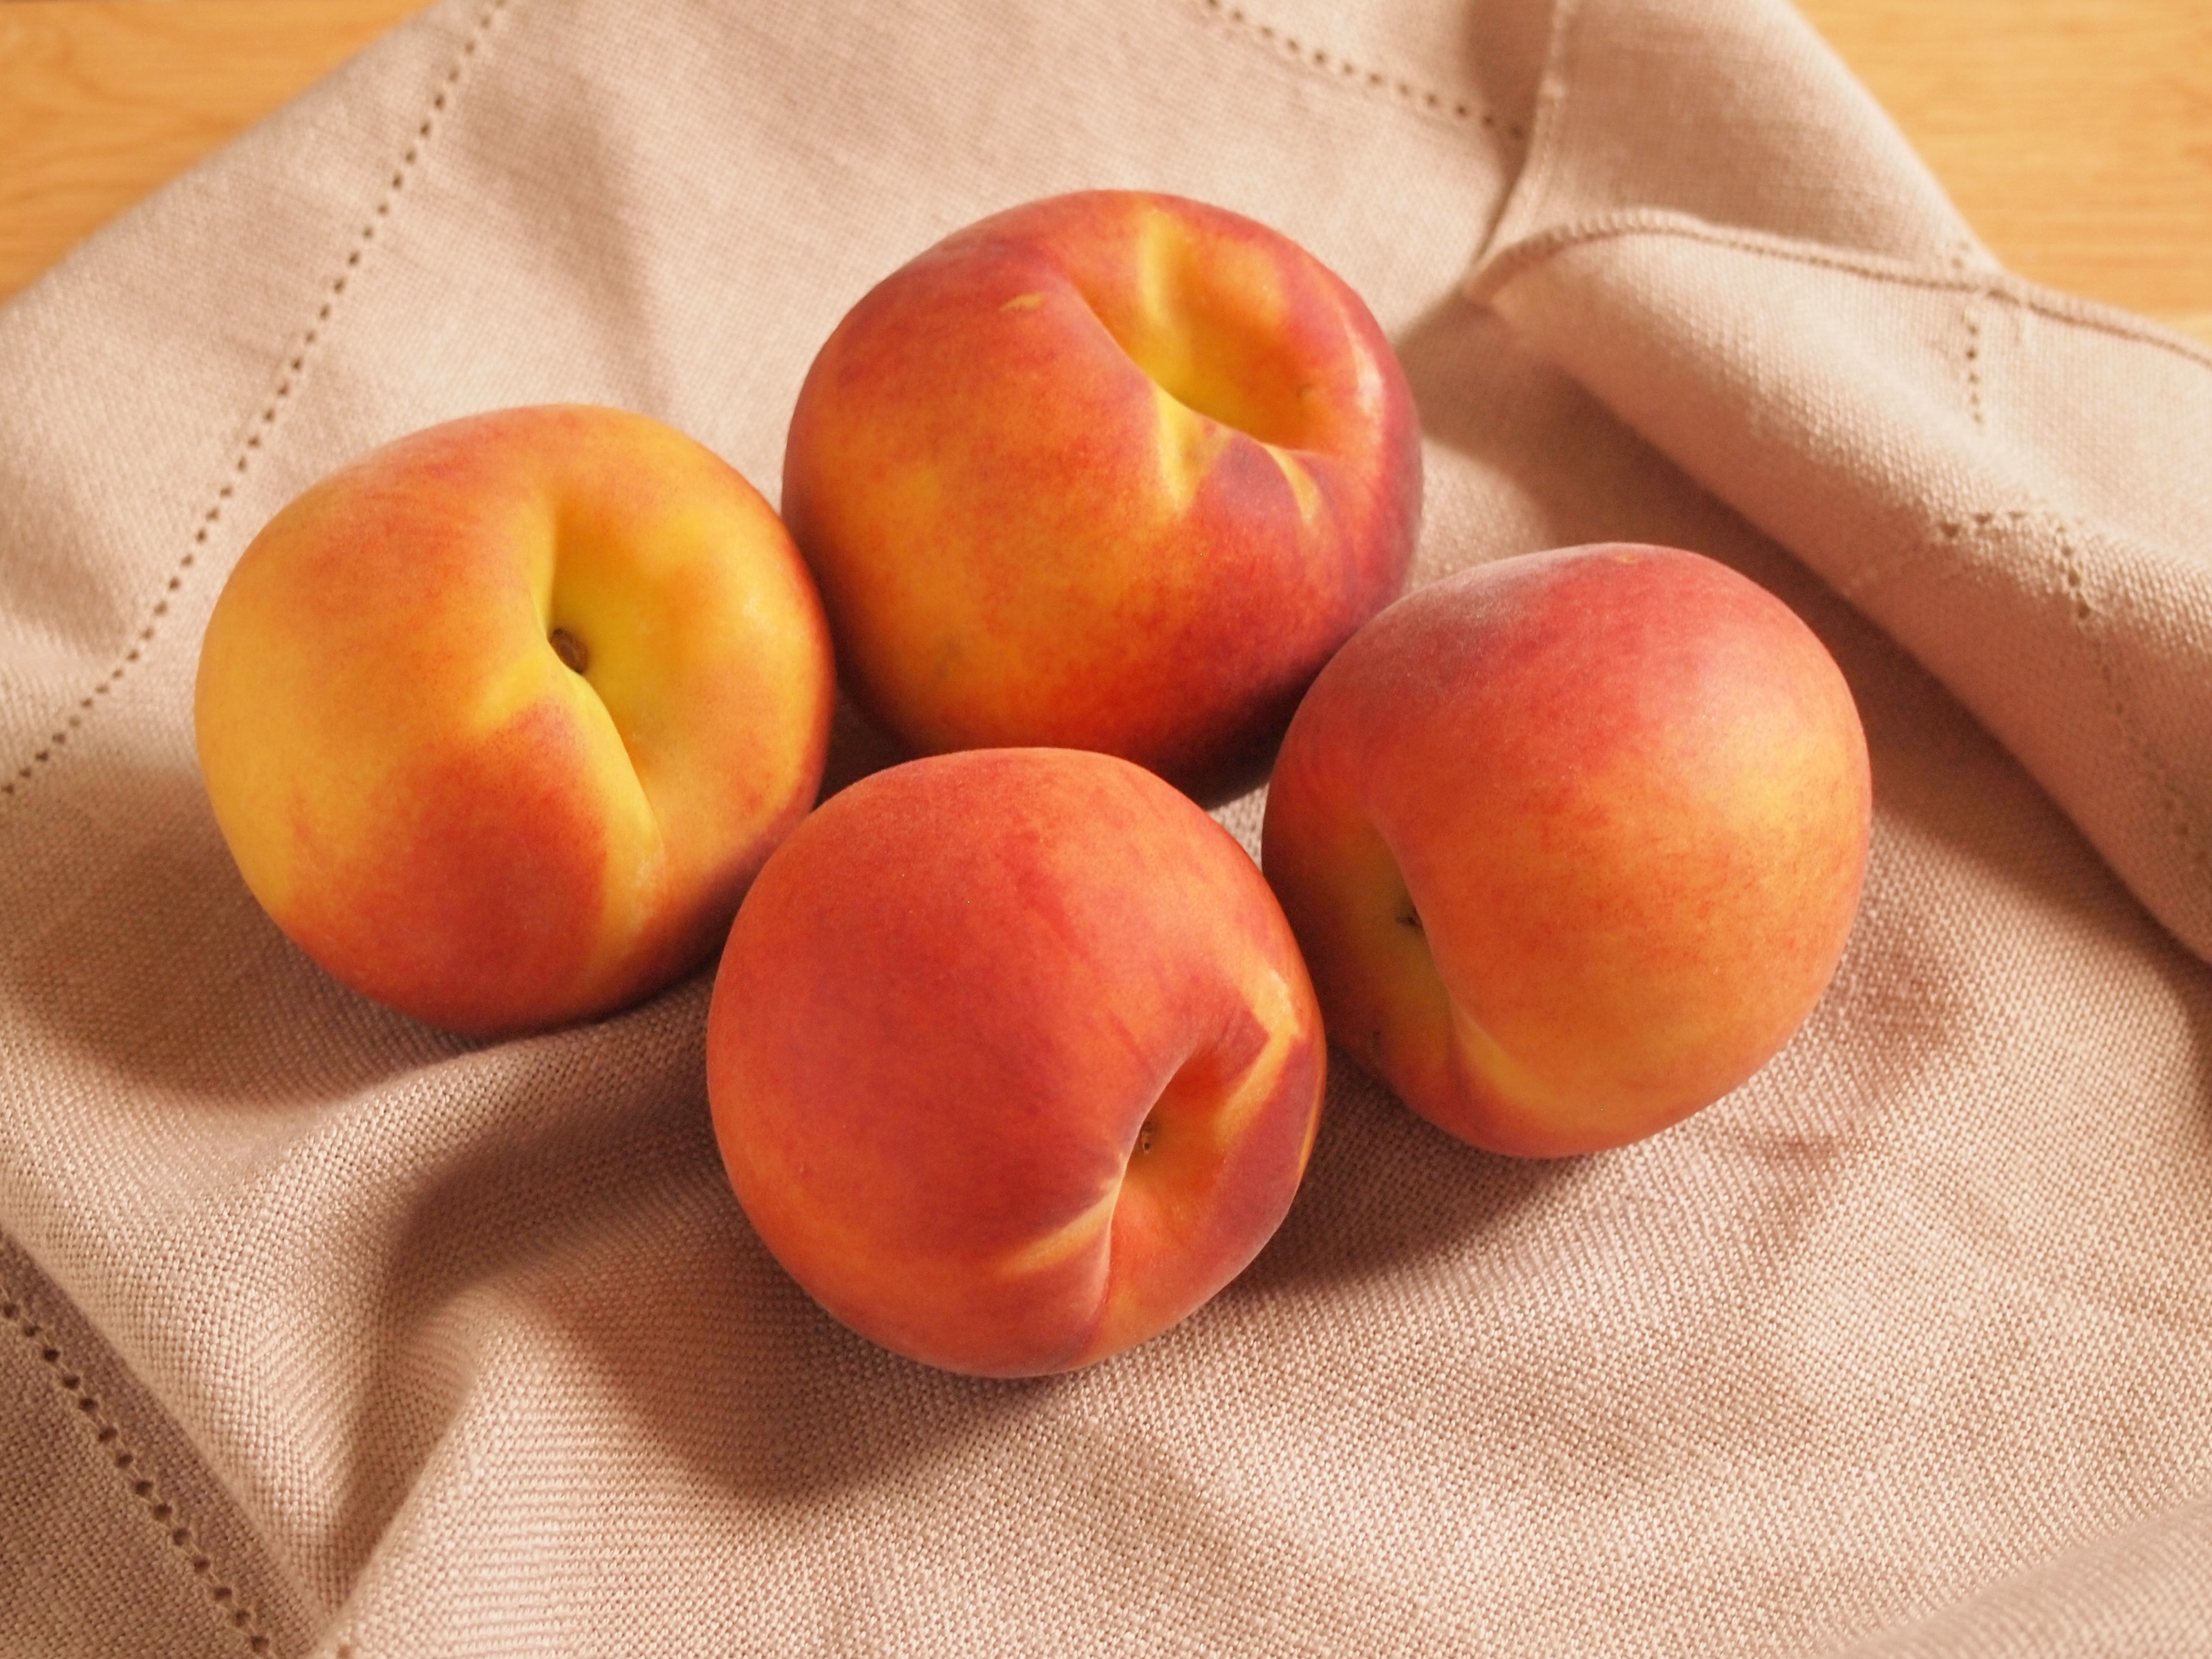 2 Easy Ways to Ripen Peaches - wikiHow